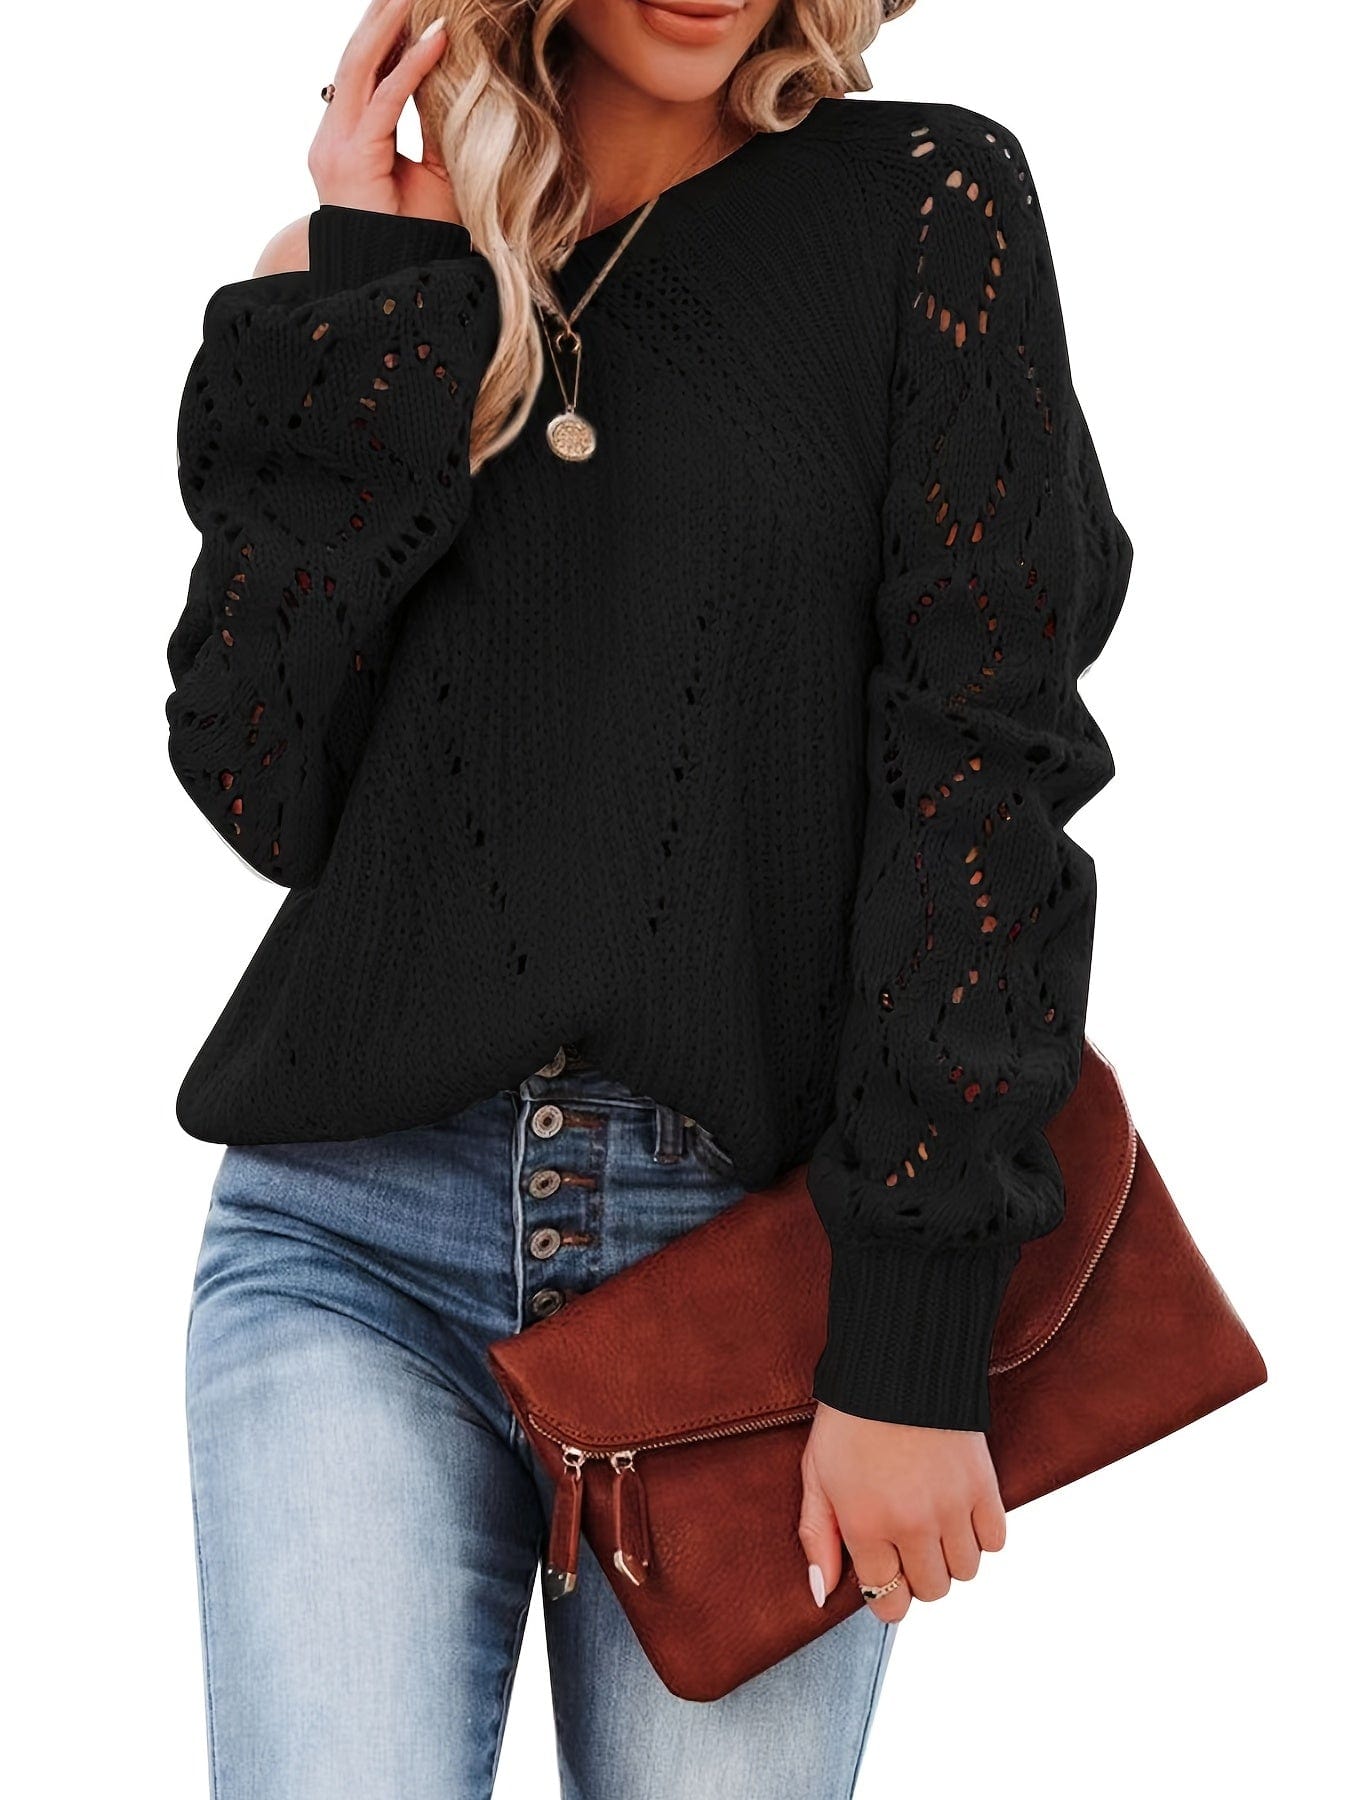 Plus Size Casual Sweater, Women's Plus Solid Eyelet Embroidered Lantern Sleeve Round Neck Slight Stretch Sweater PLU2309A3419BLK0XL(12) Black / 0XL(12)